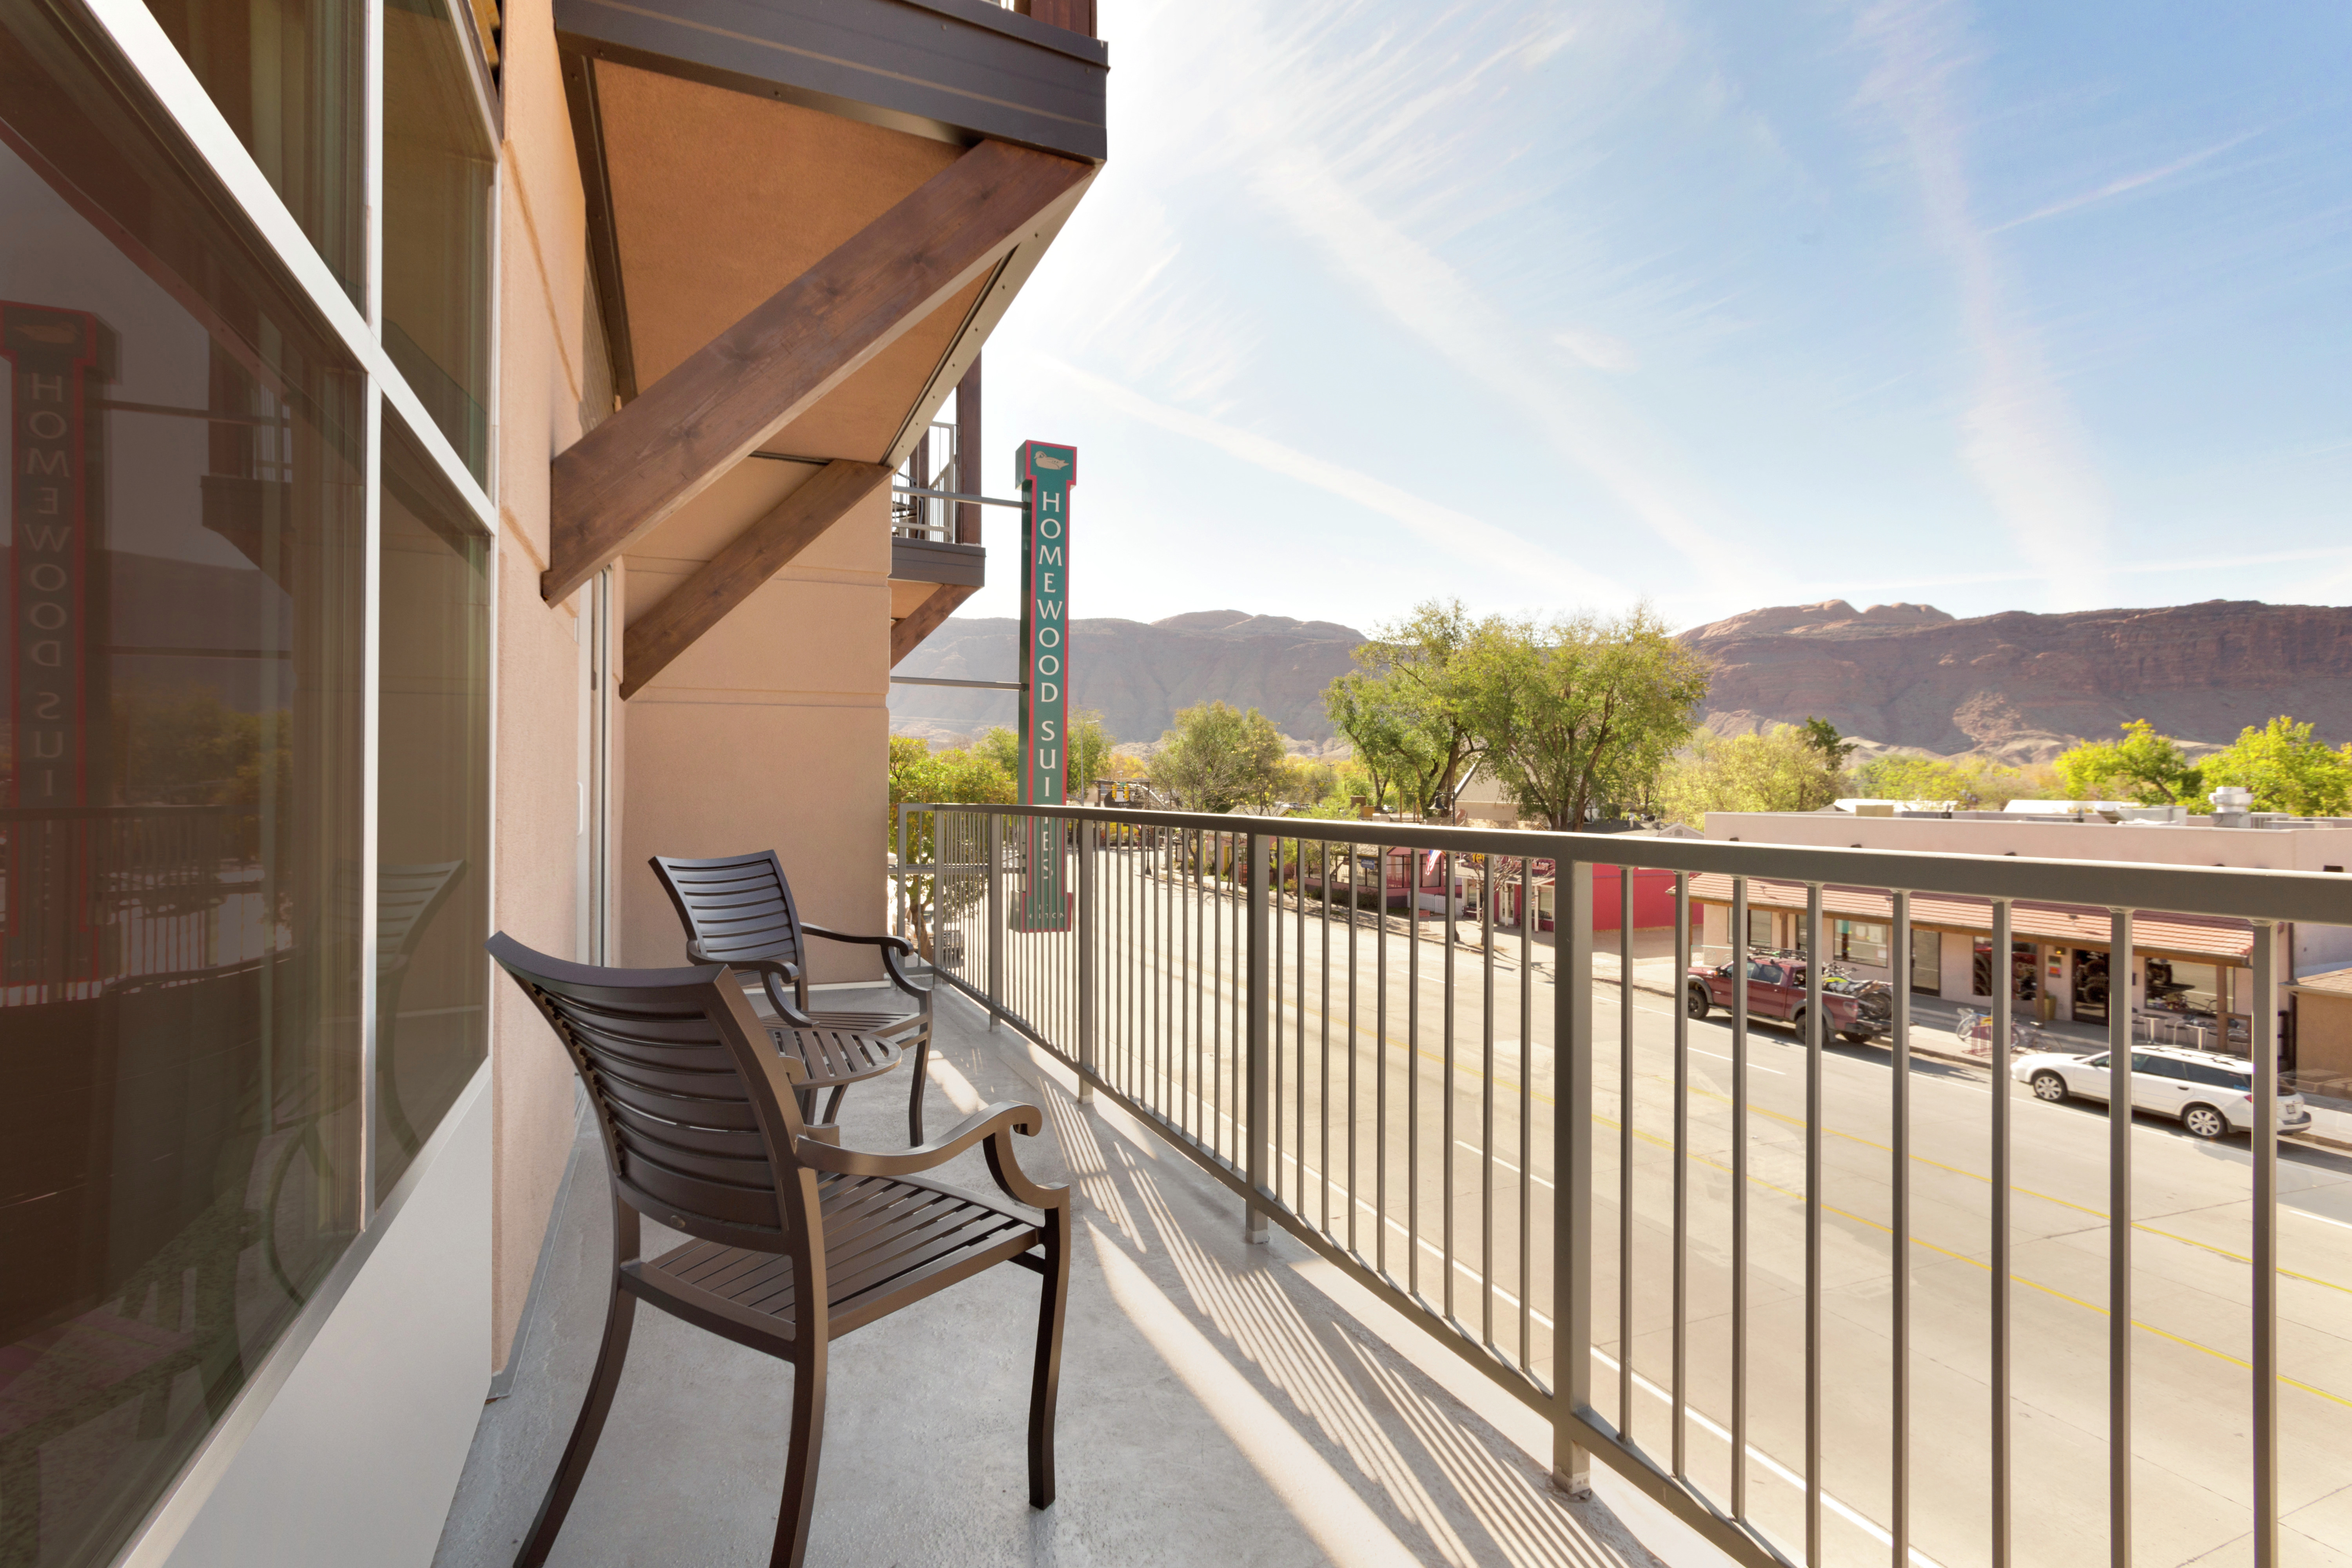 Guest Room Balcony with Scenic Moab View